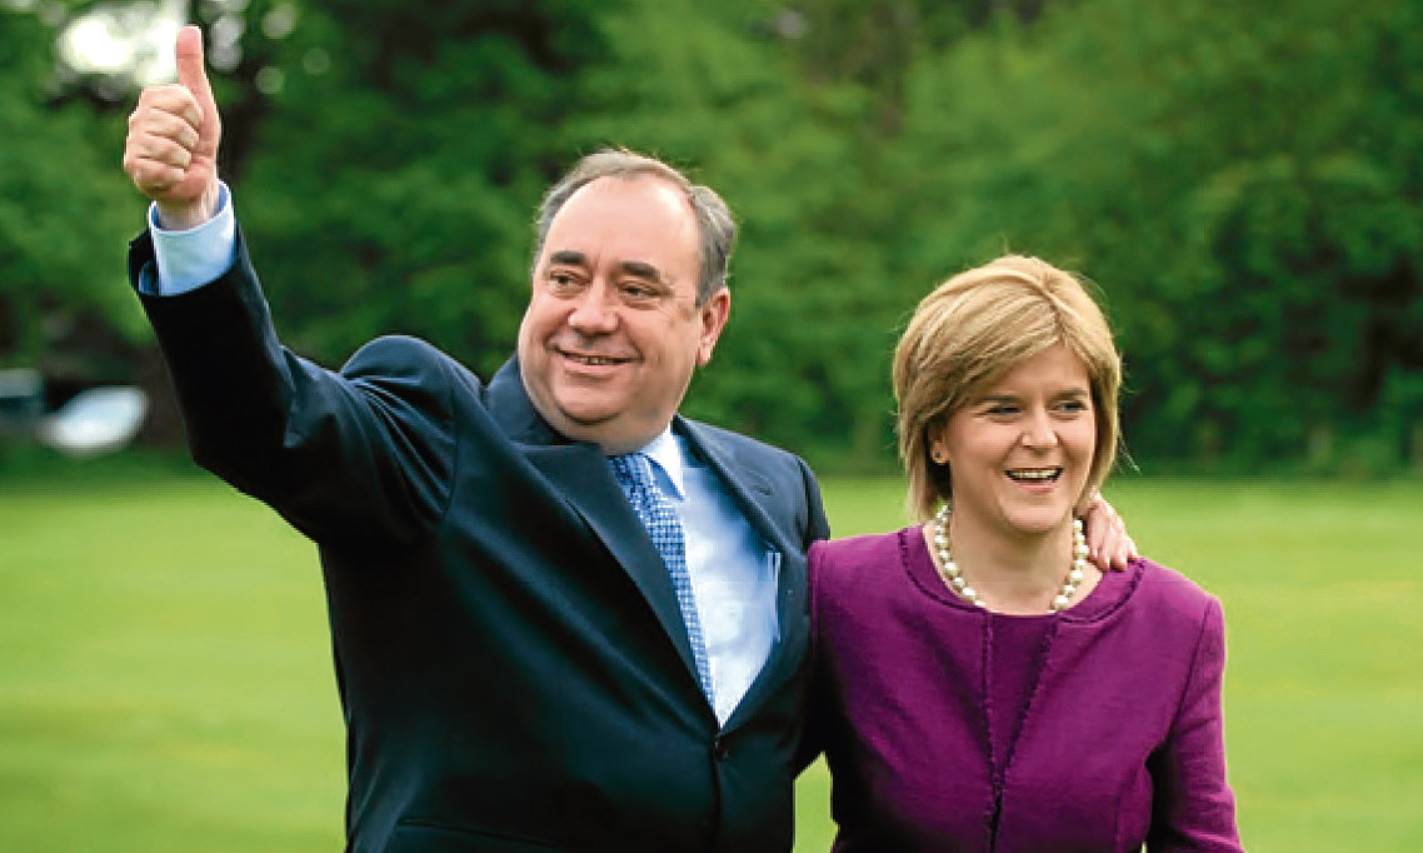 Alex Salmond and Nicola Sturgeon celebrating their historic election victory in 2007.